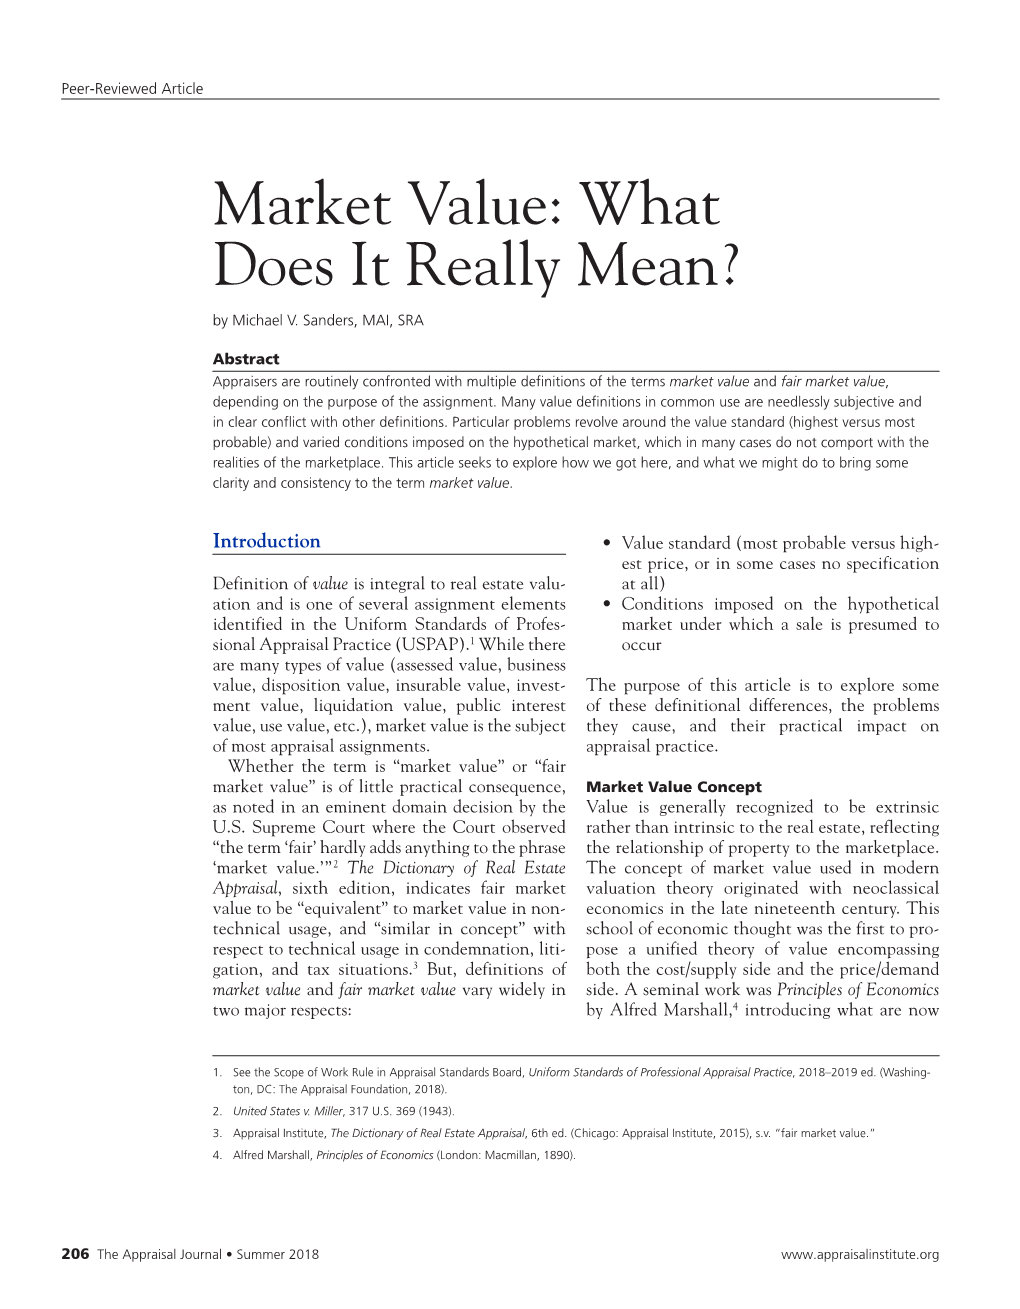 Market Value: What Does It Really Mean?